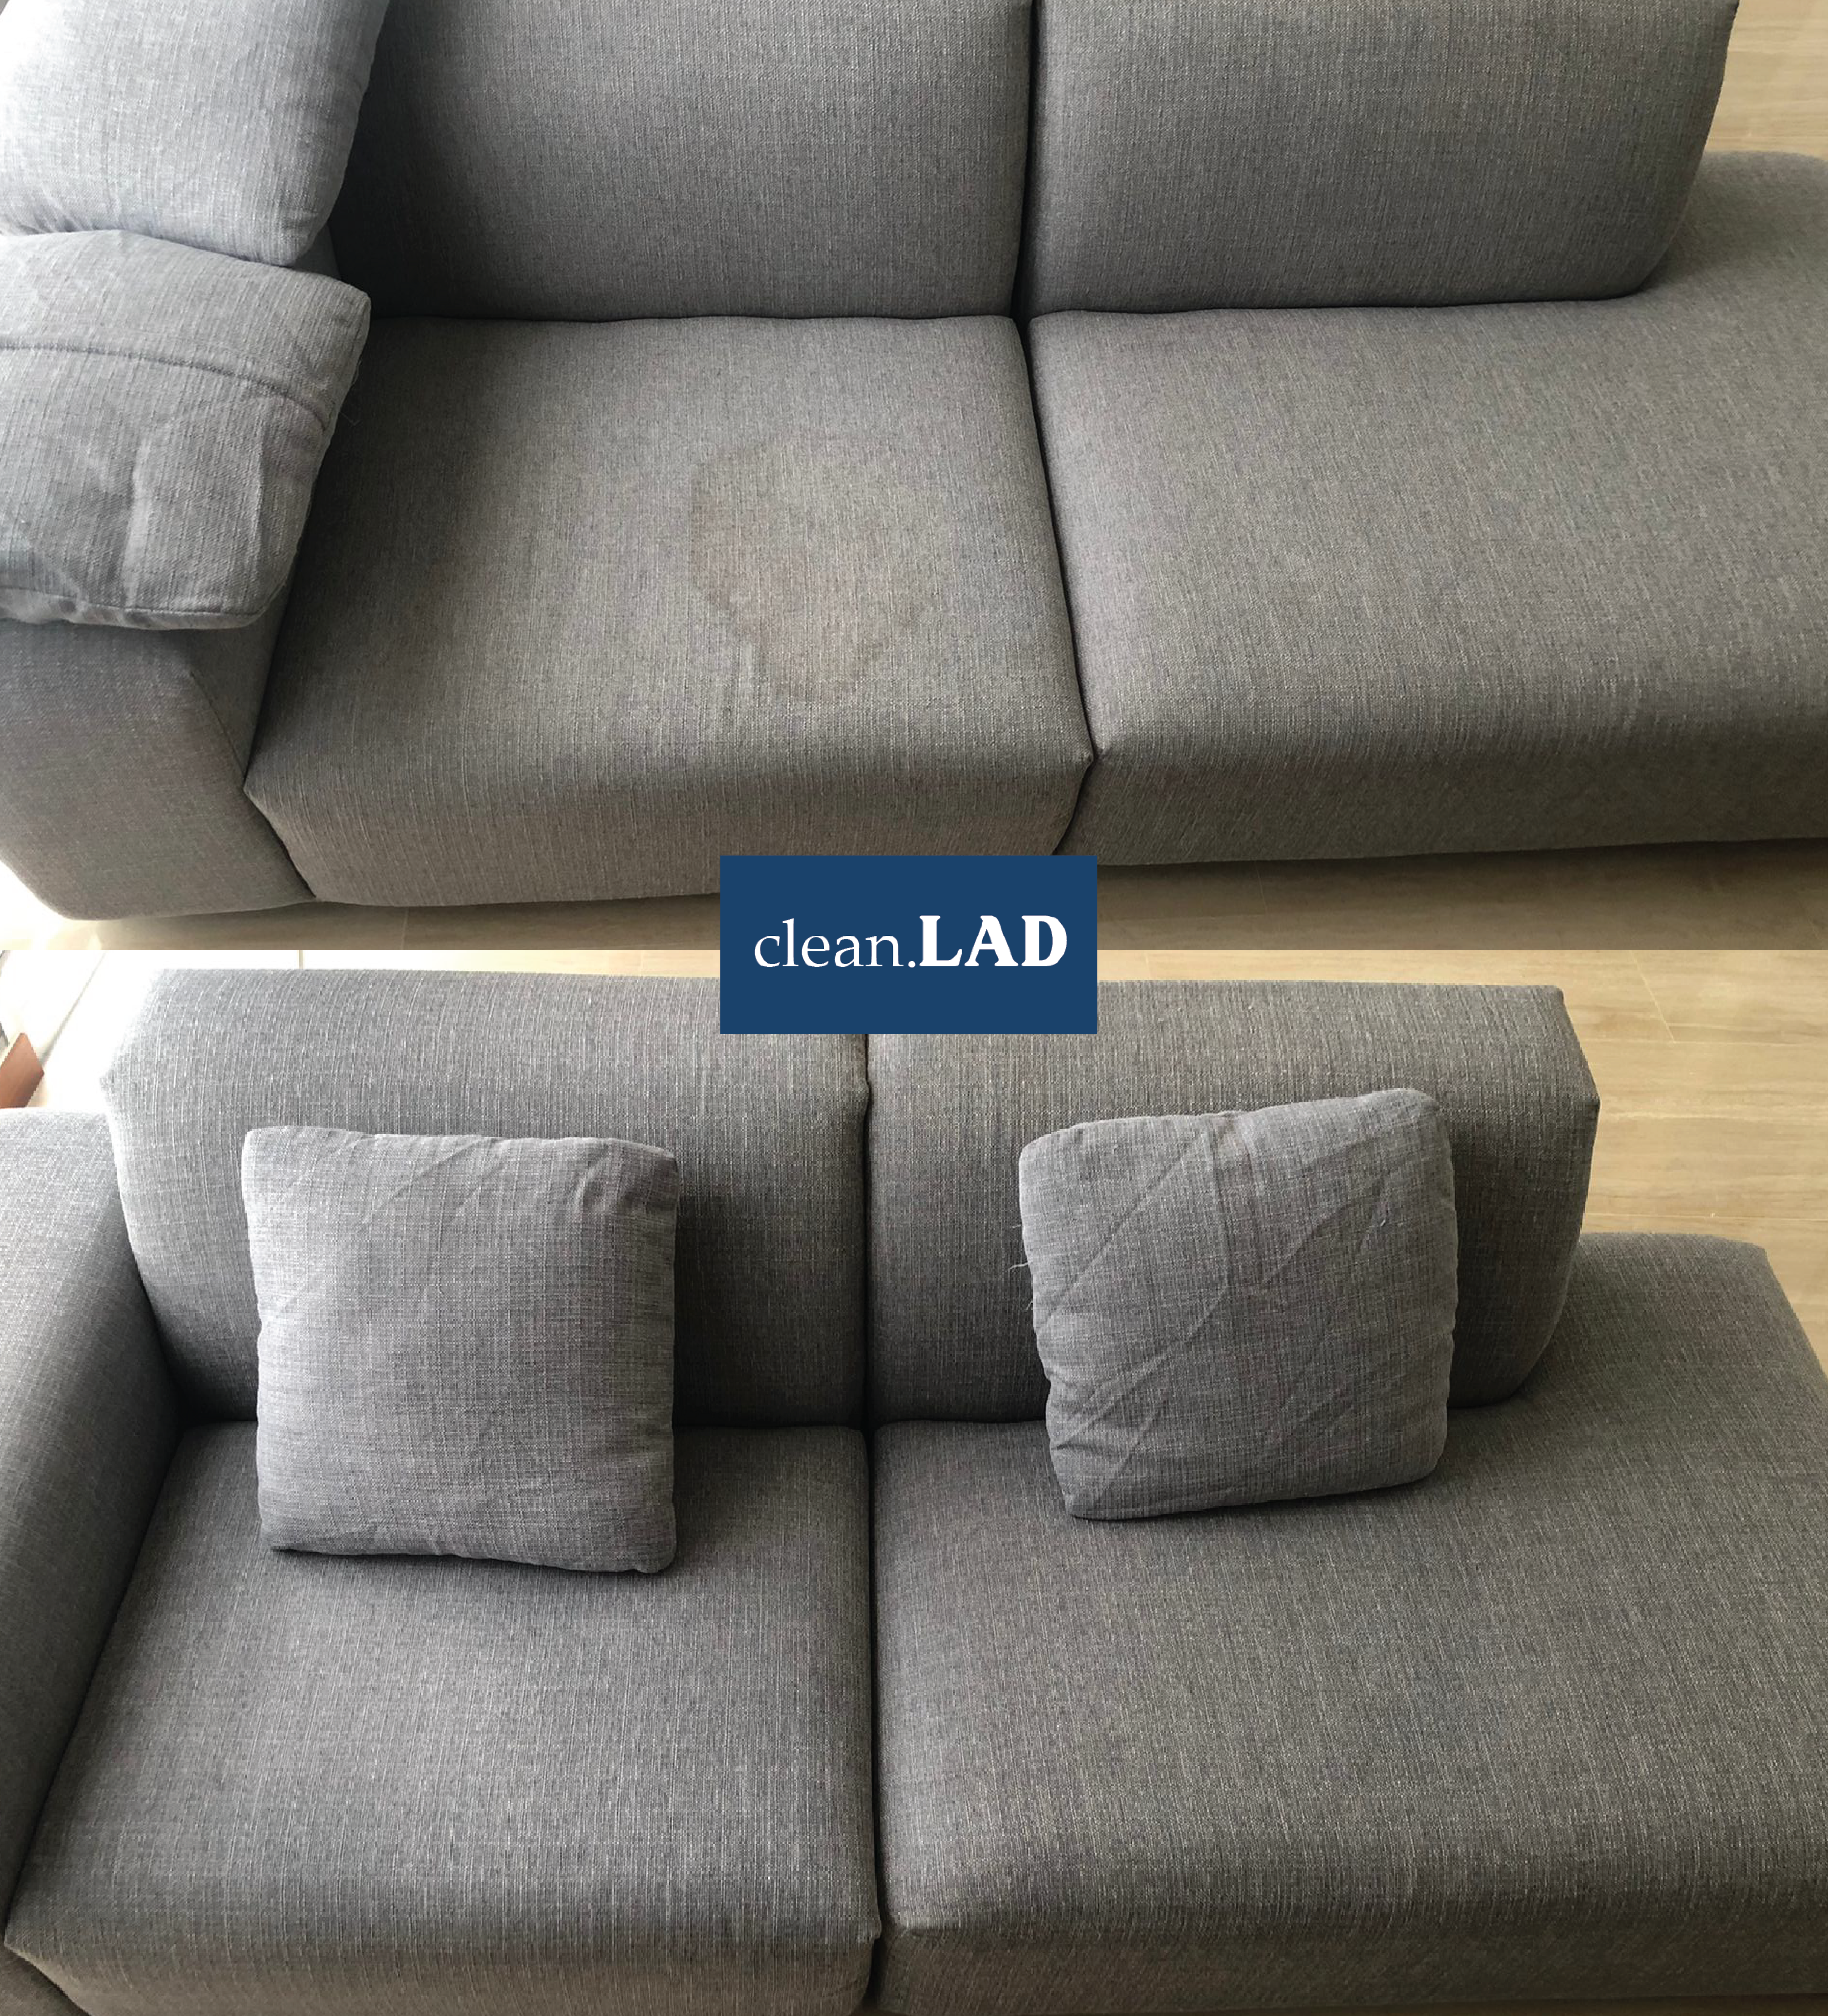 Sofa Cleaning Service | cleanLAD